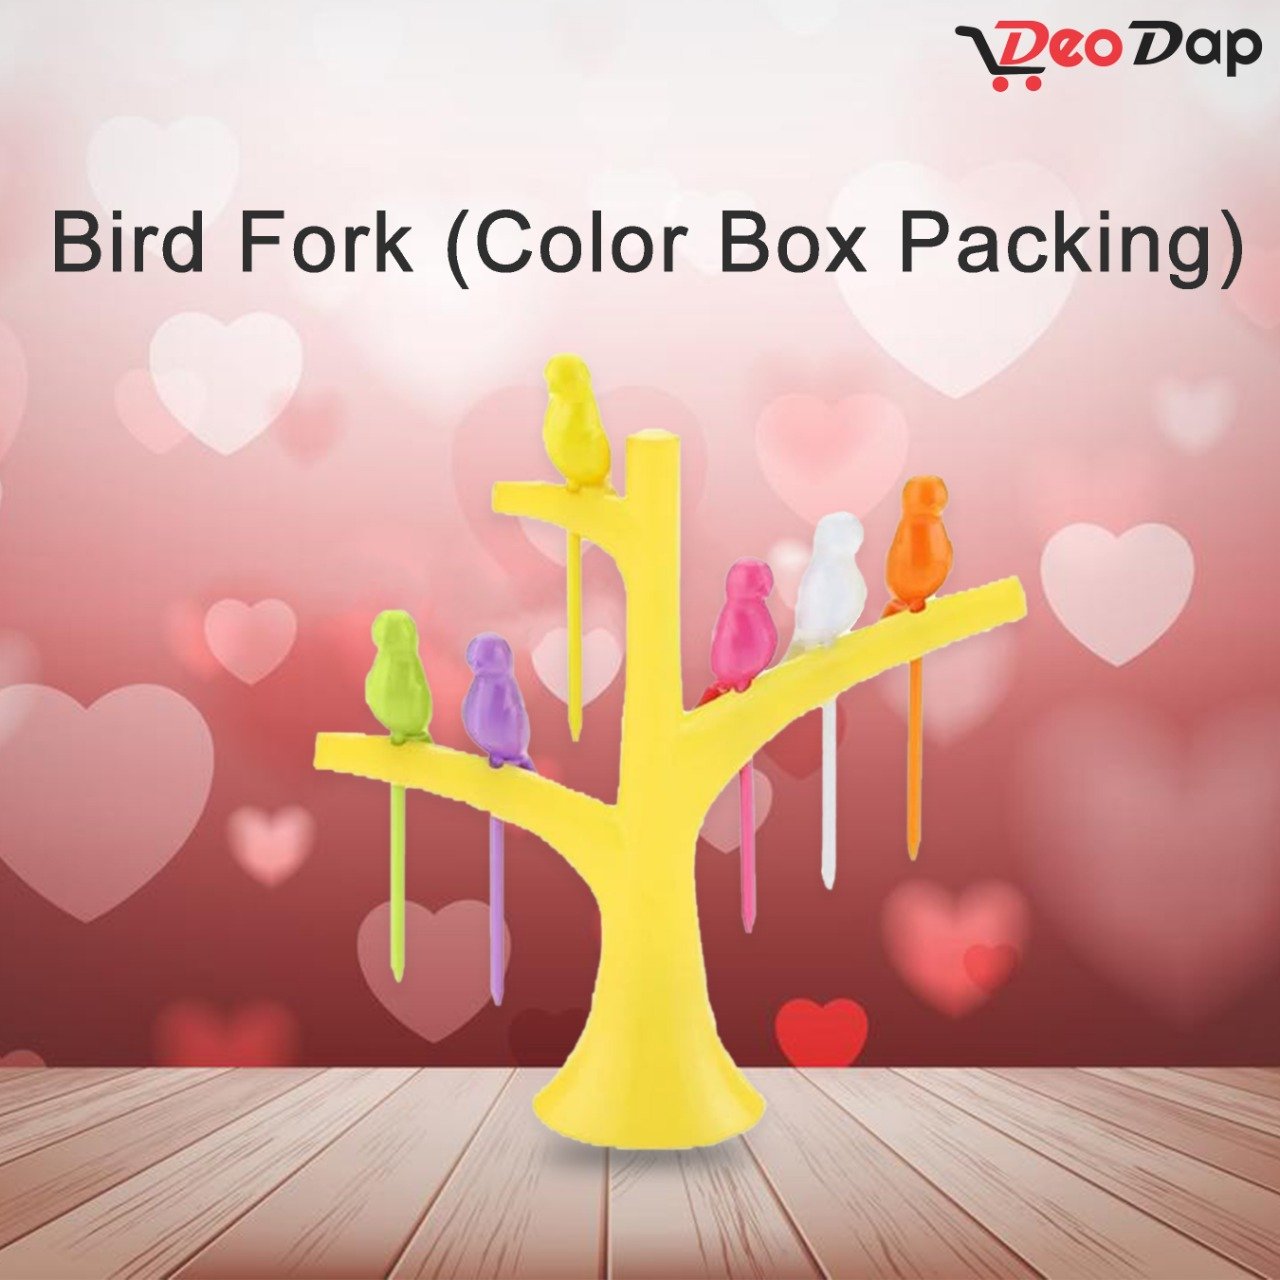 bird-fork-color-box-packing